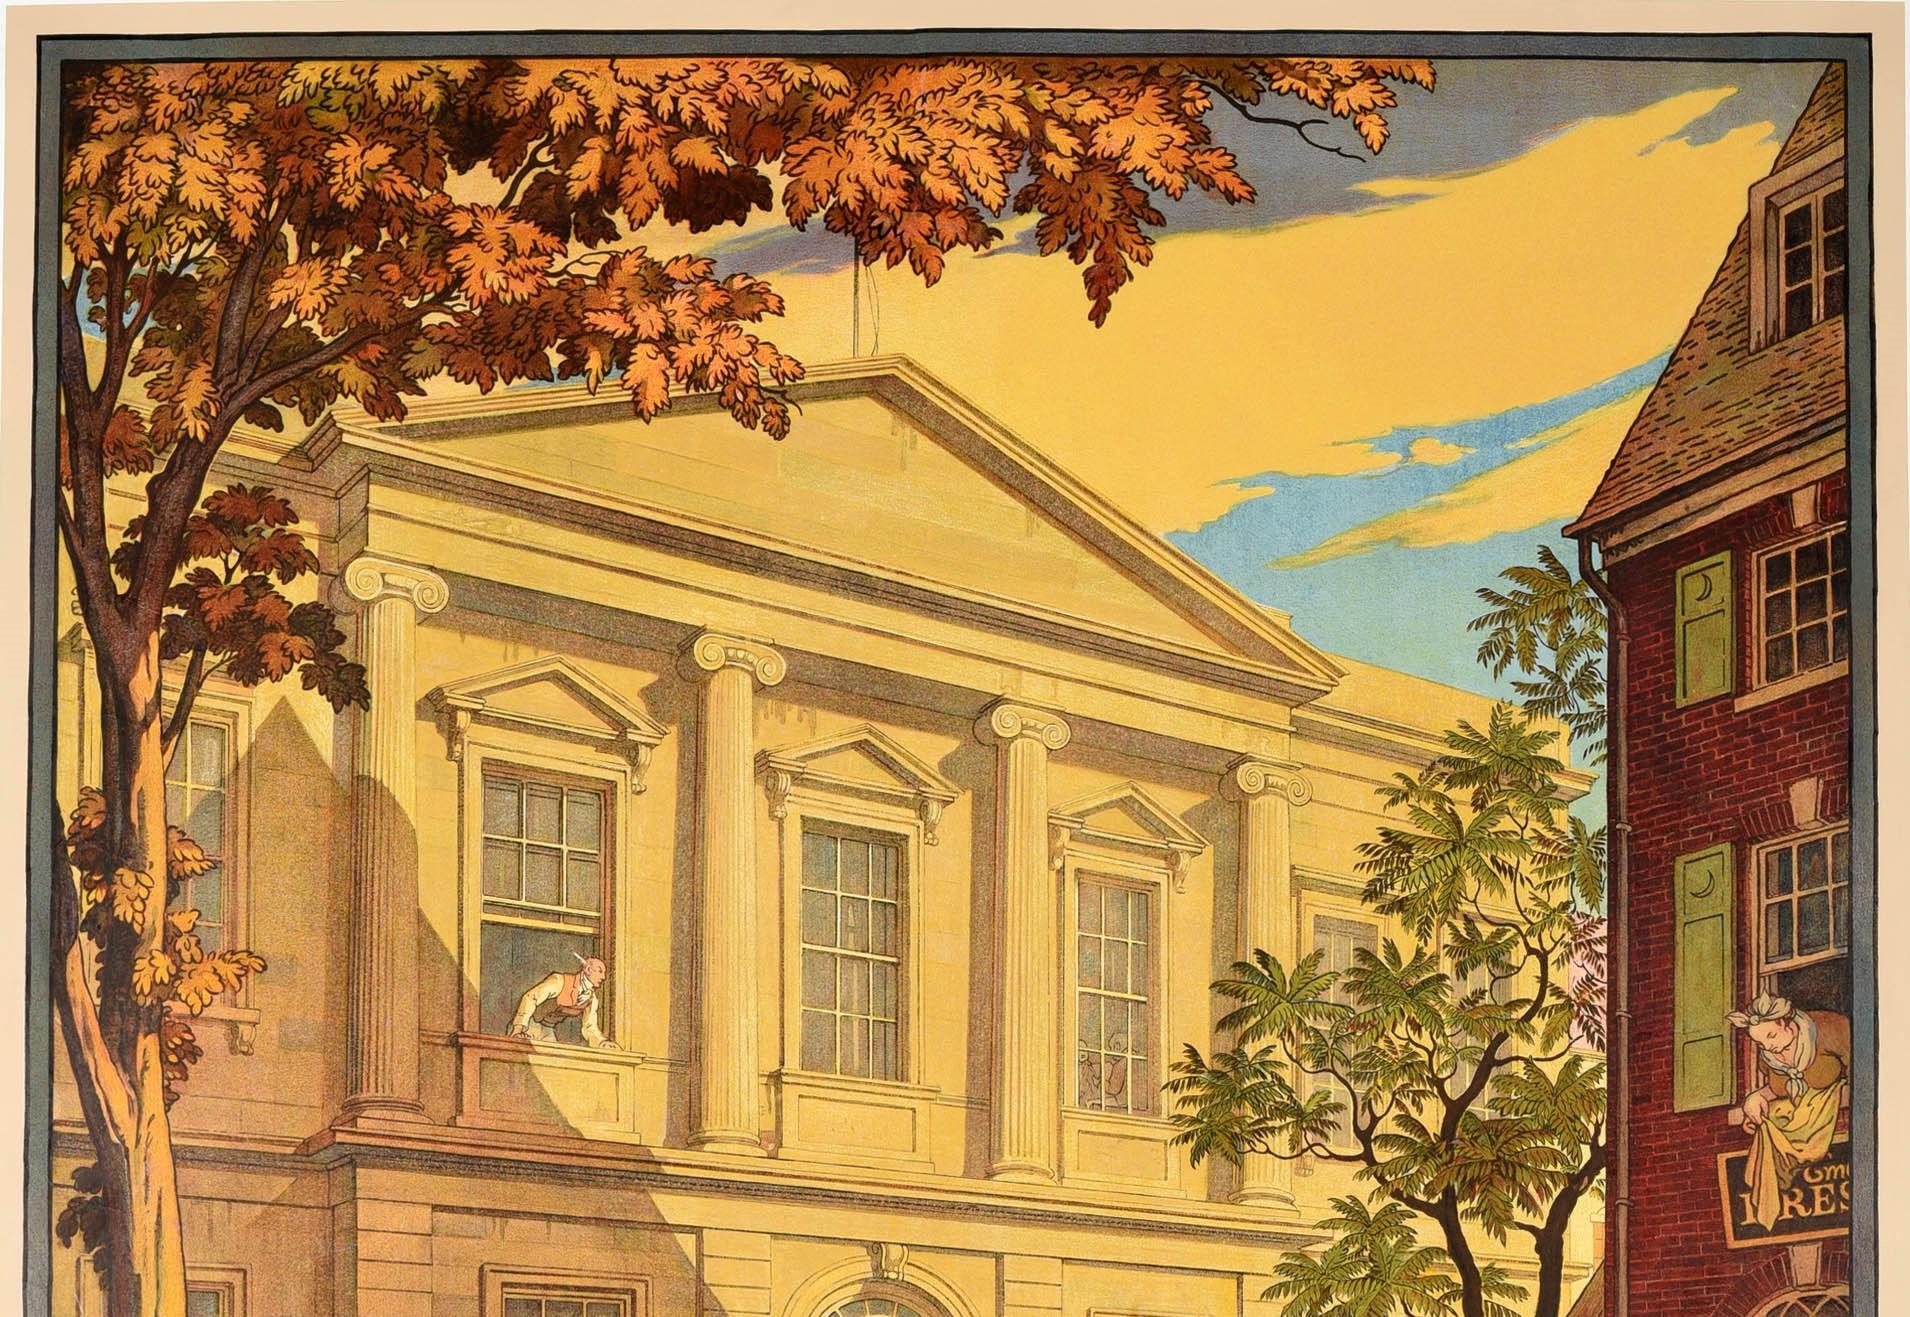 Original vintage advertising poster for The Metropolitan Museum of Art American Wing featuring a great illustration by Thomas Maitland Cleland (1880-1964) of a sunny day outside the grand frontage of the American Wing with people in period clothing,